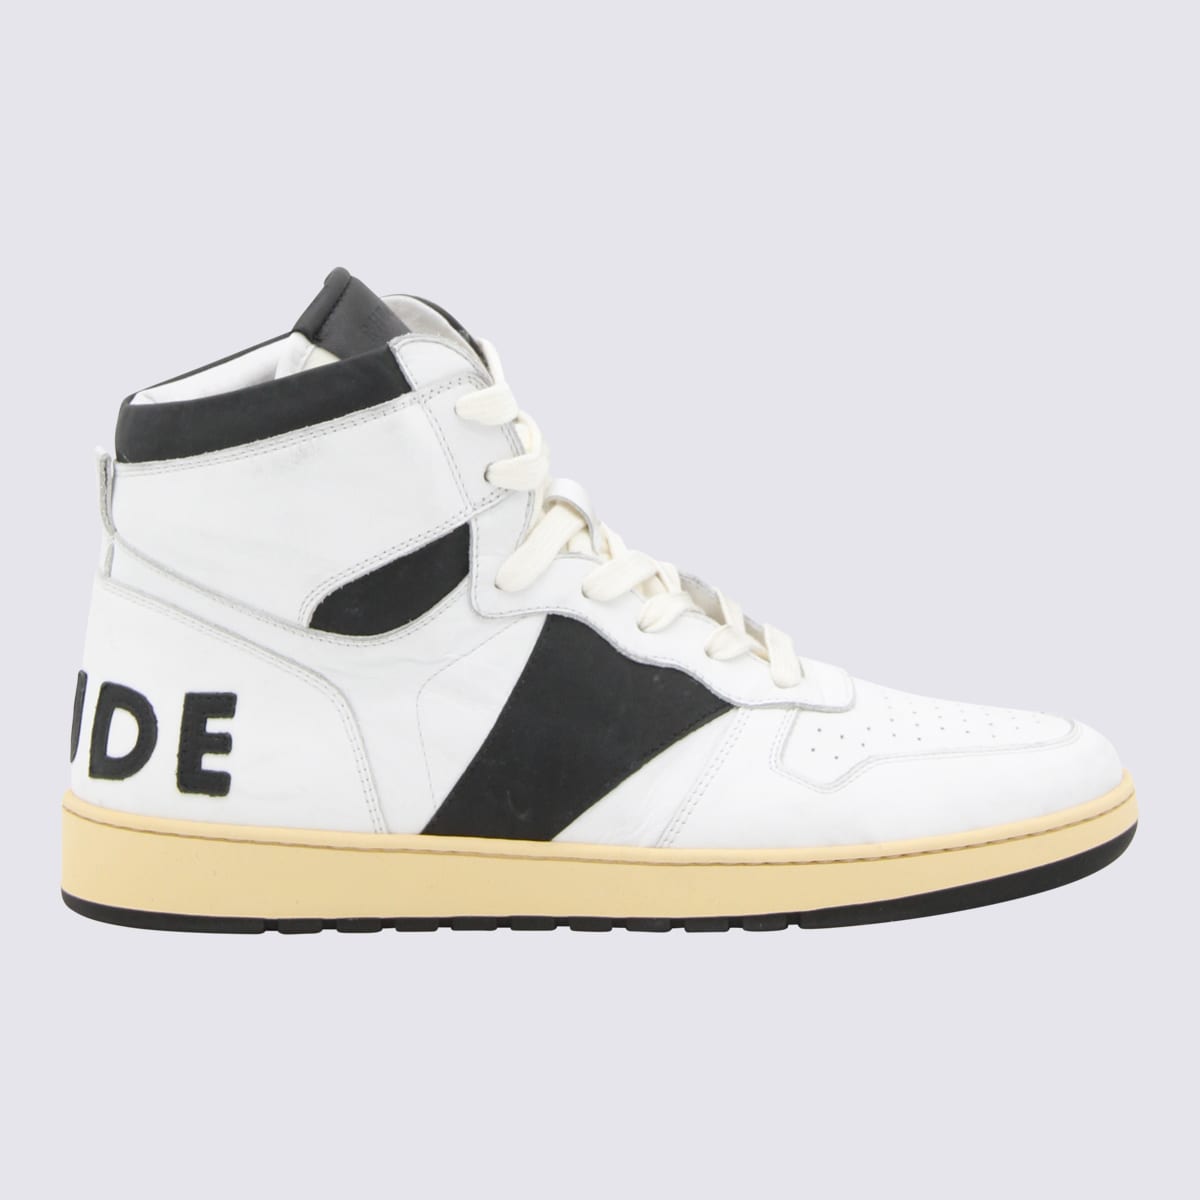 Rhude White Leather Rhecess Sneakers